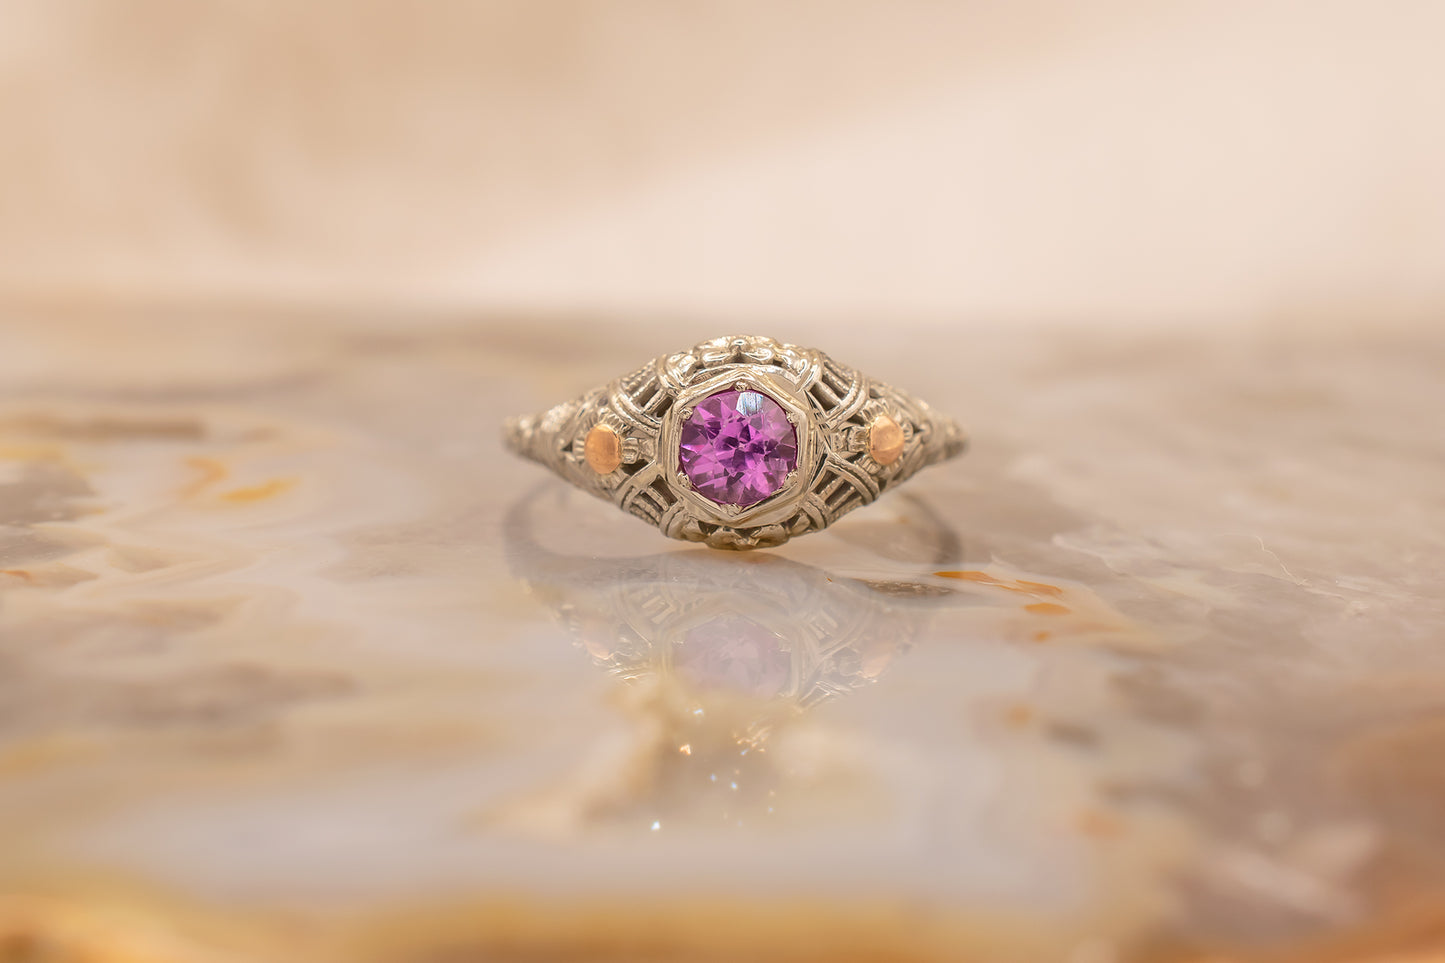 Vintage Circa 1930s Art Deco 18K White Gold 0.39 ct. Pink Sapphire Ring With Filigree and Floral Details Size 5